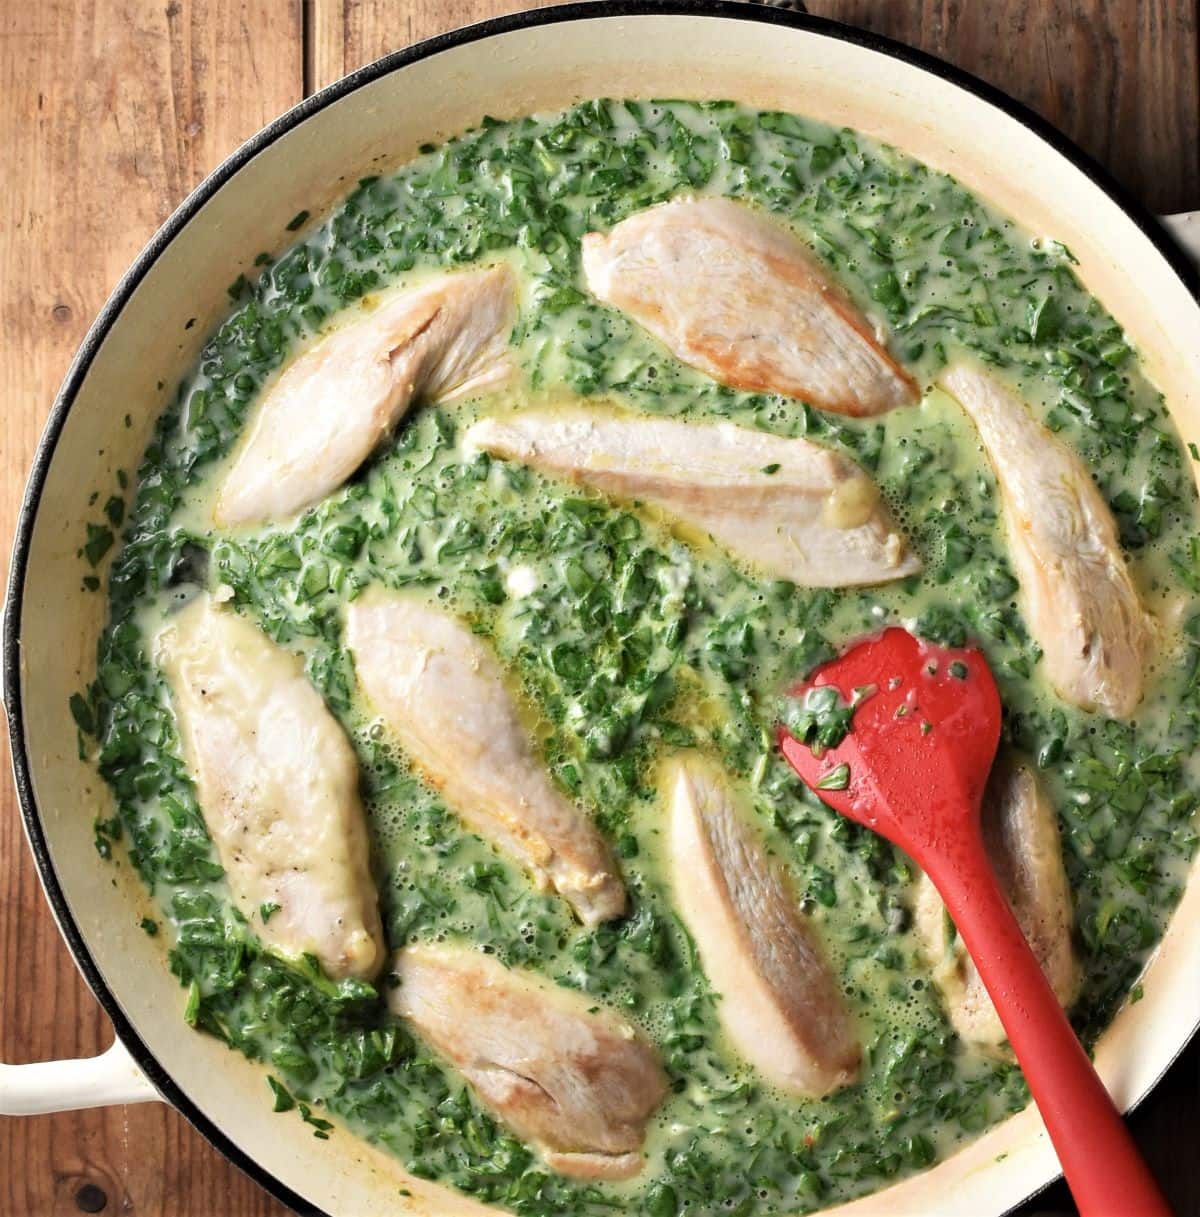 Chicken strips in creamy spinach sauce in large shallow pan with red spatula.